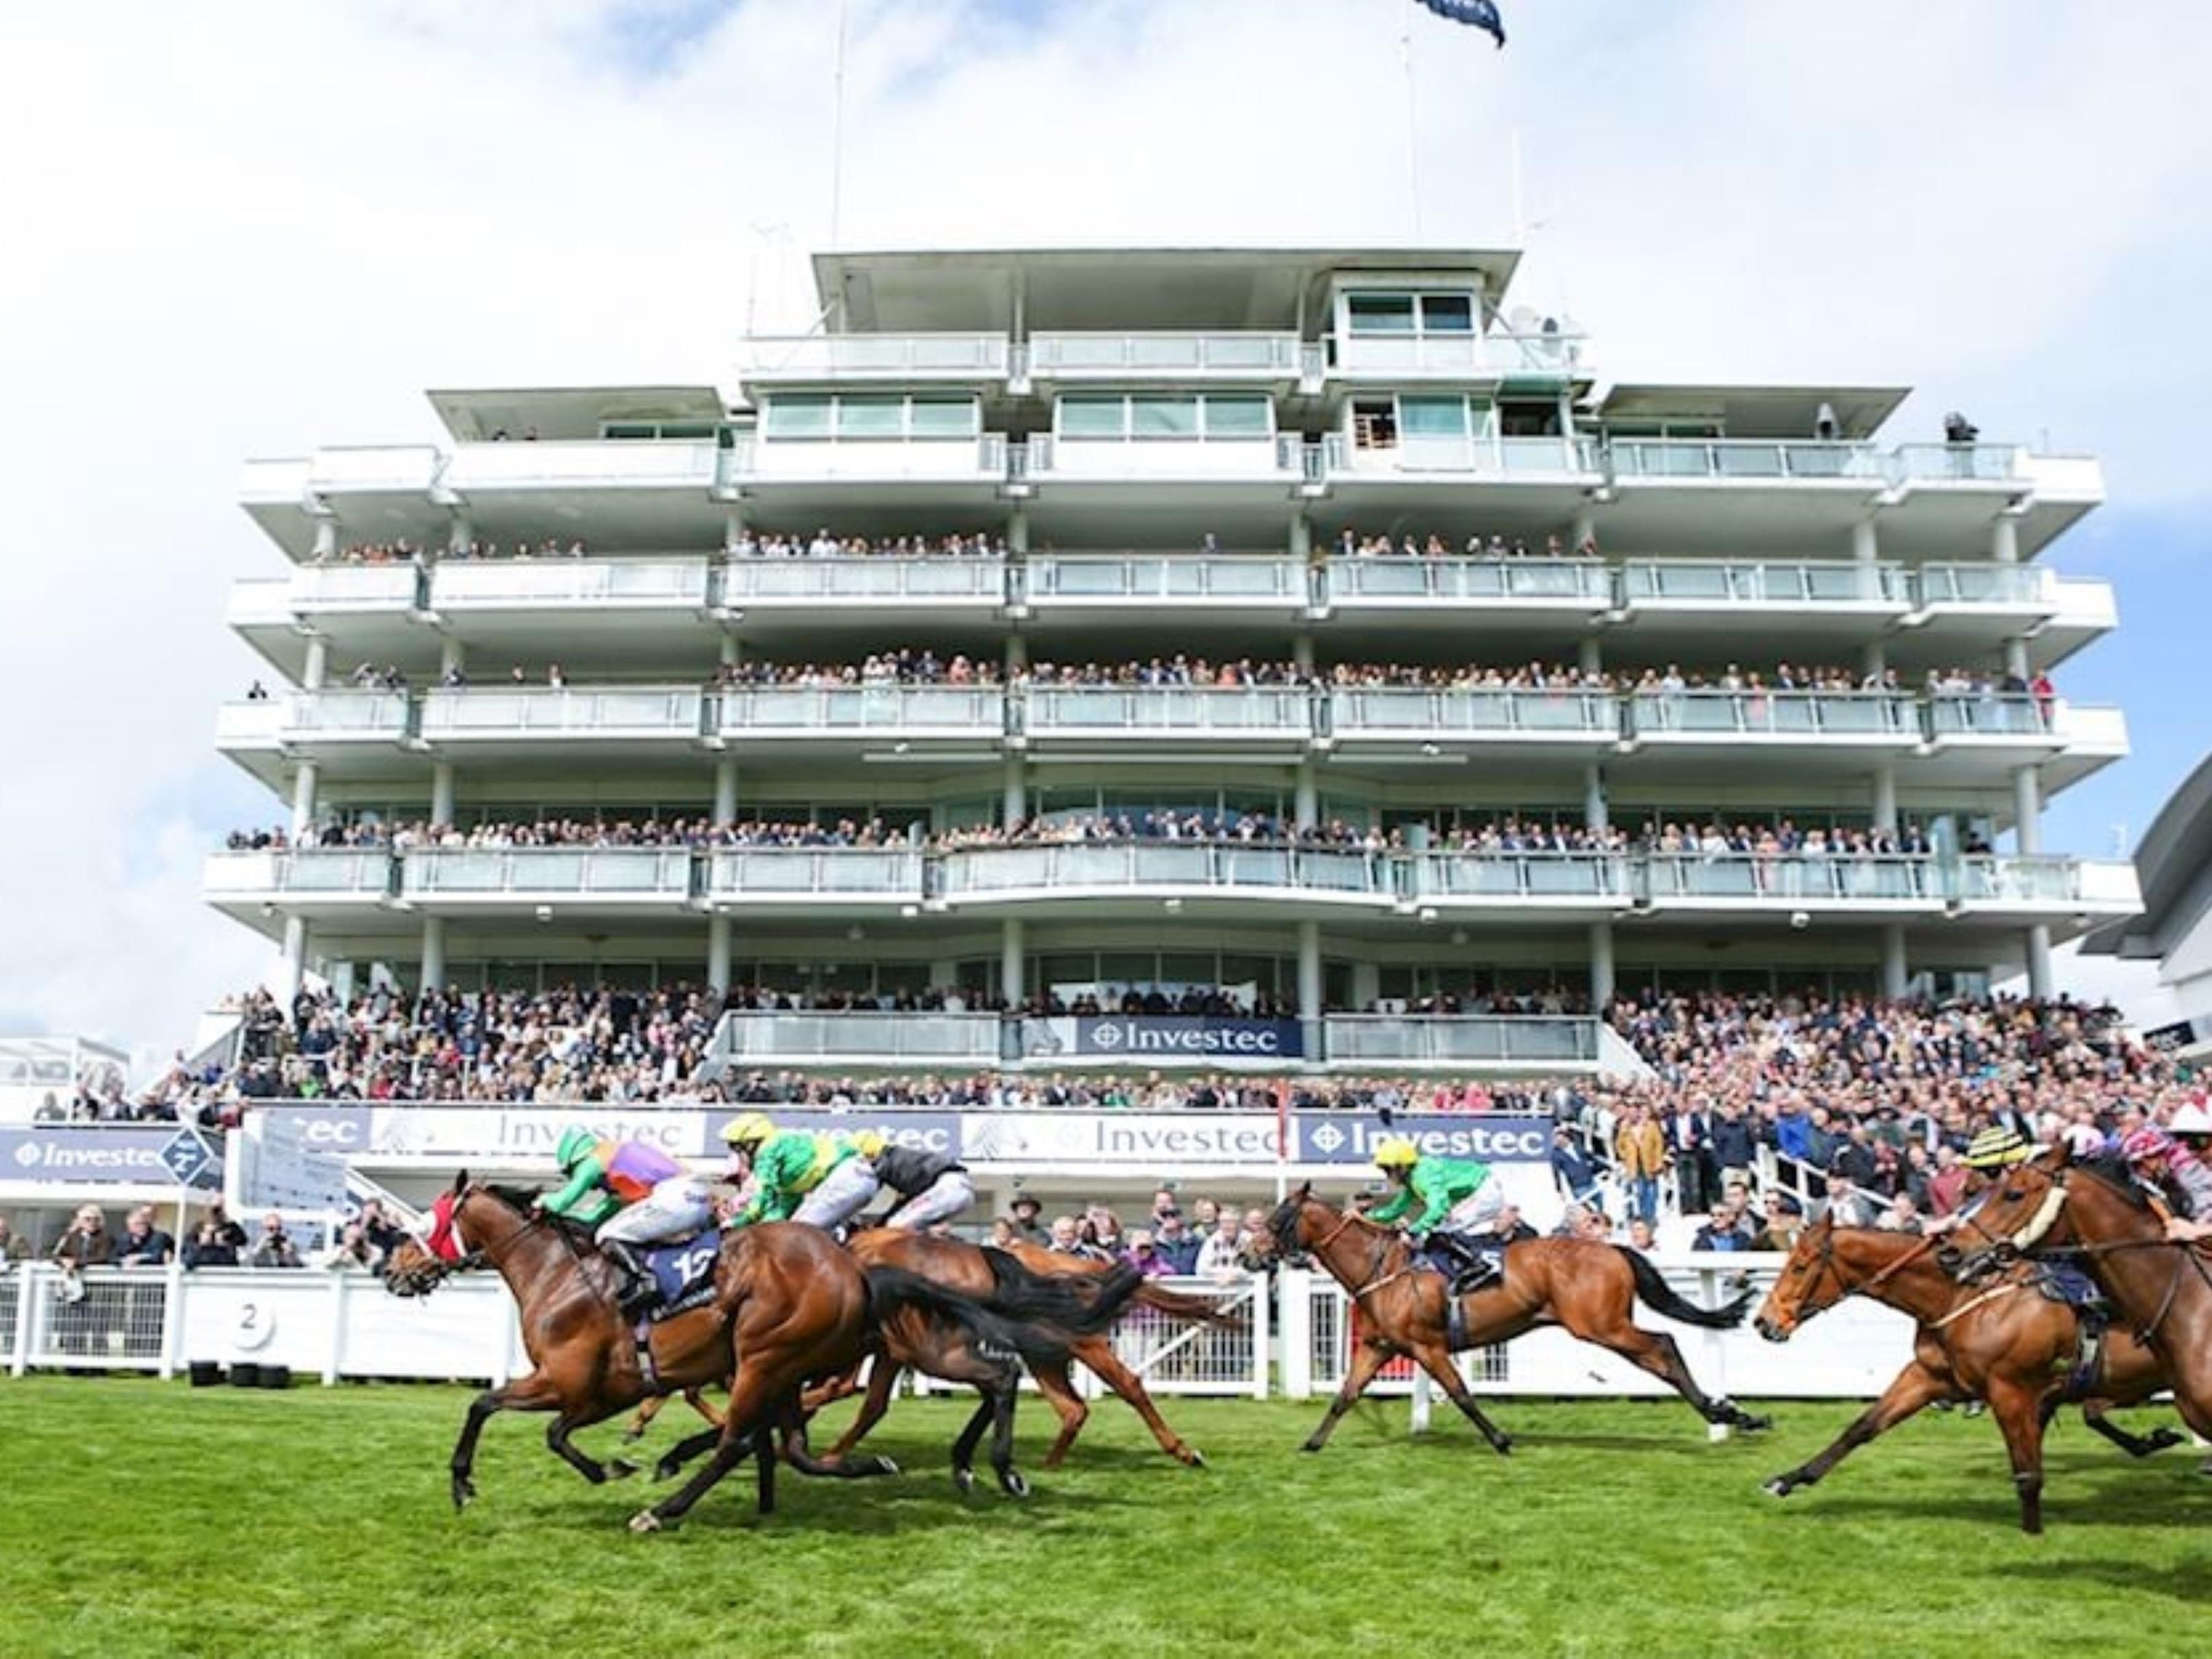 Racing at Epsom Downs Racecourse